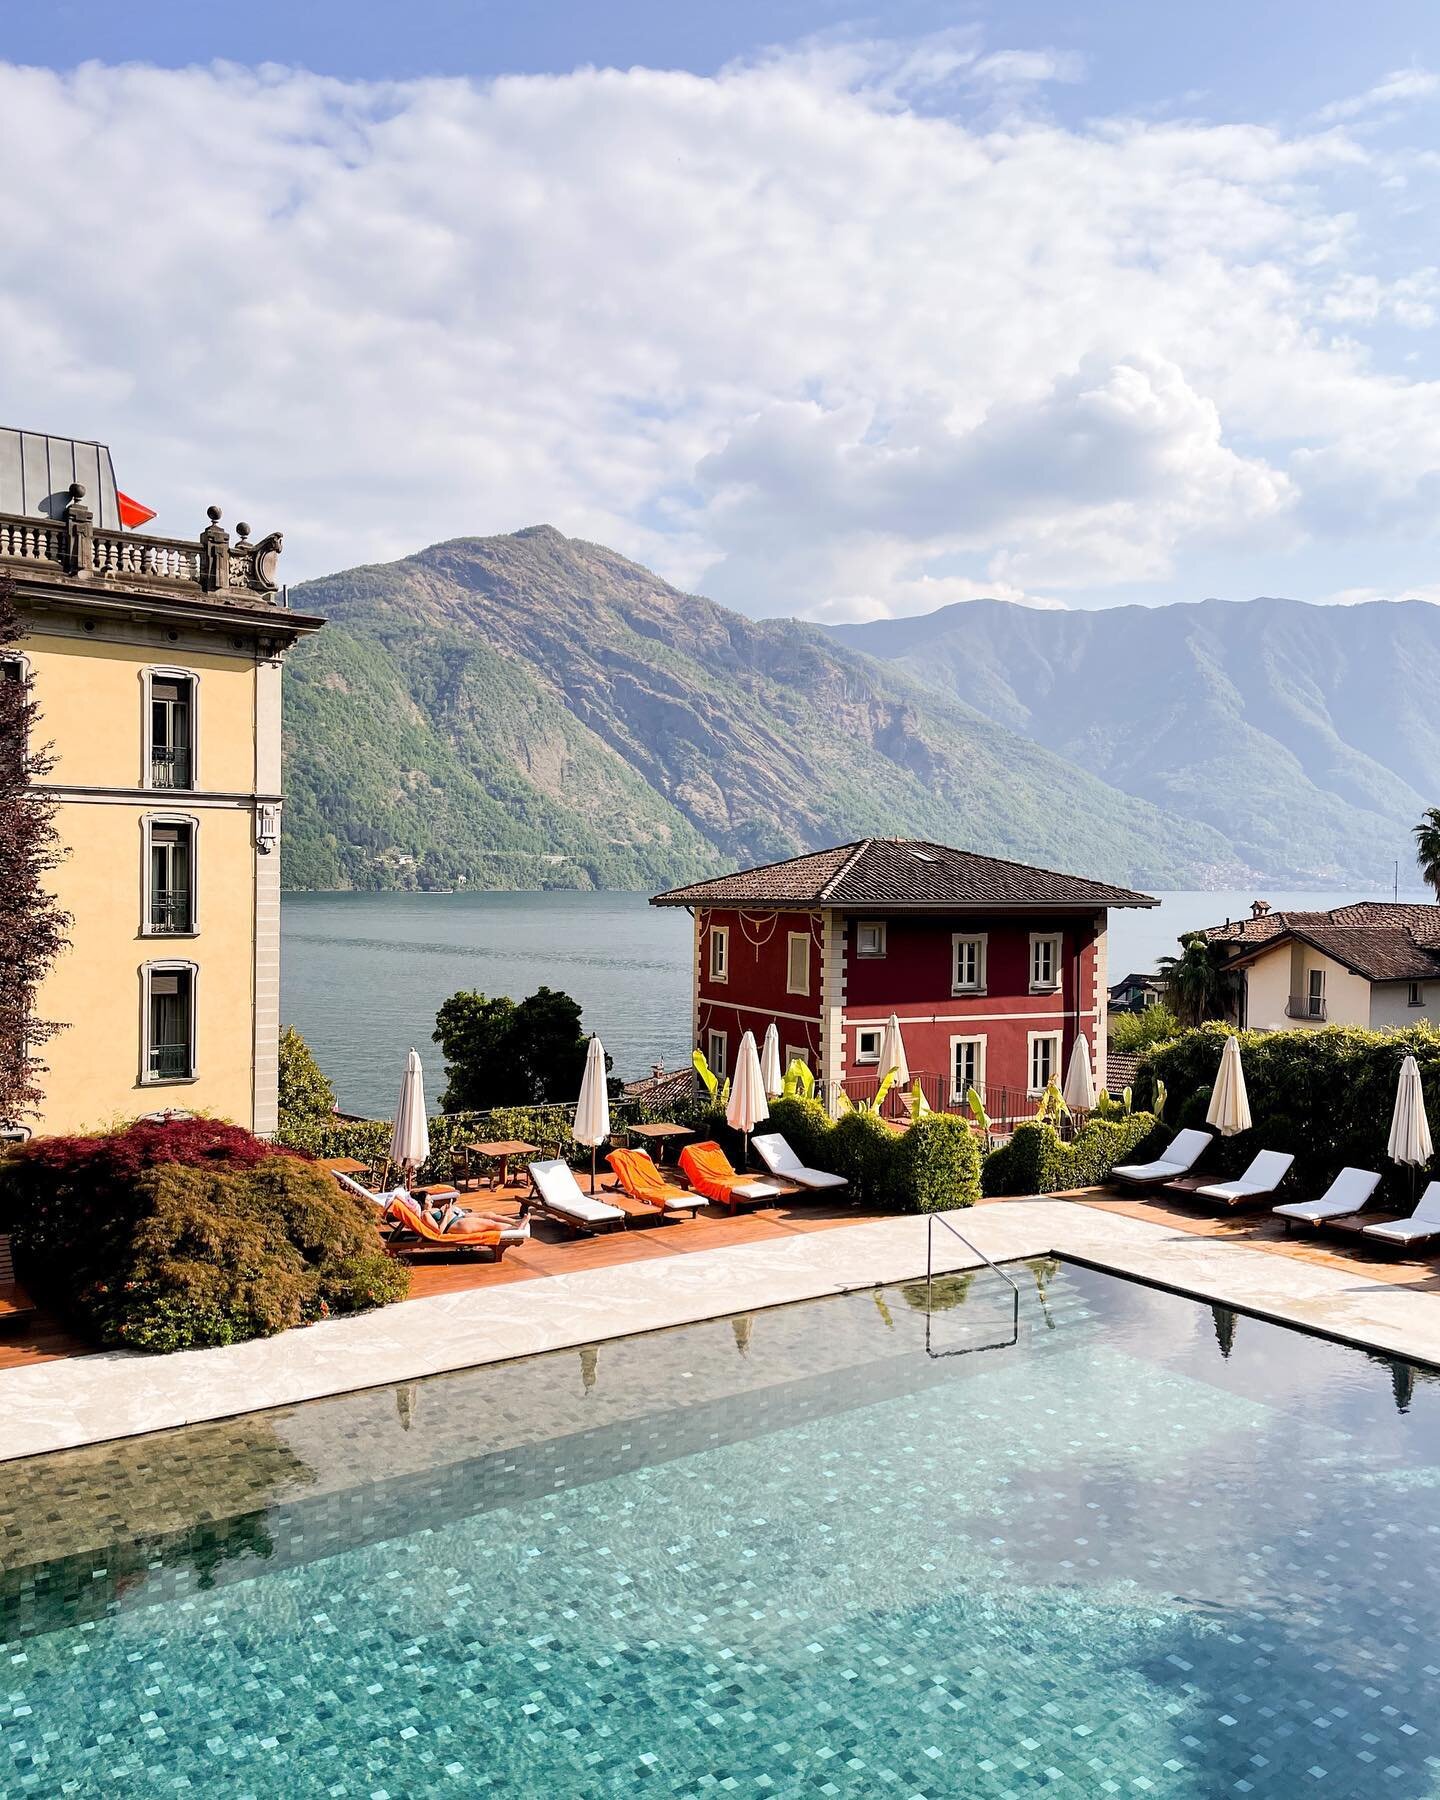 Reminiscing on an impeccable stay at @ghtlakecomo, a Sea to City client favorite hotel in Italy!
⠀⠀⠀⠀⠀⠀⠀⠀⠀
Buzzing restaurants, 2 outdoor and 1 indoor pool, prime lake-front location, a tennis court, lovely spa and fantastic food. These are all aspec